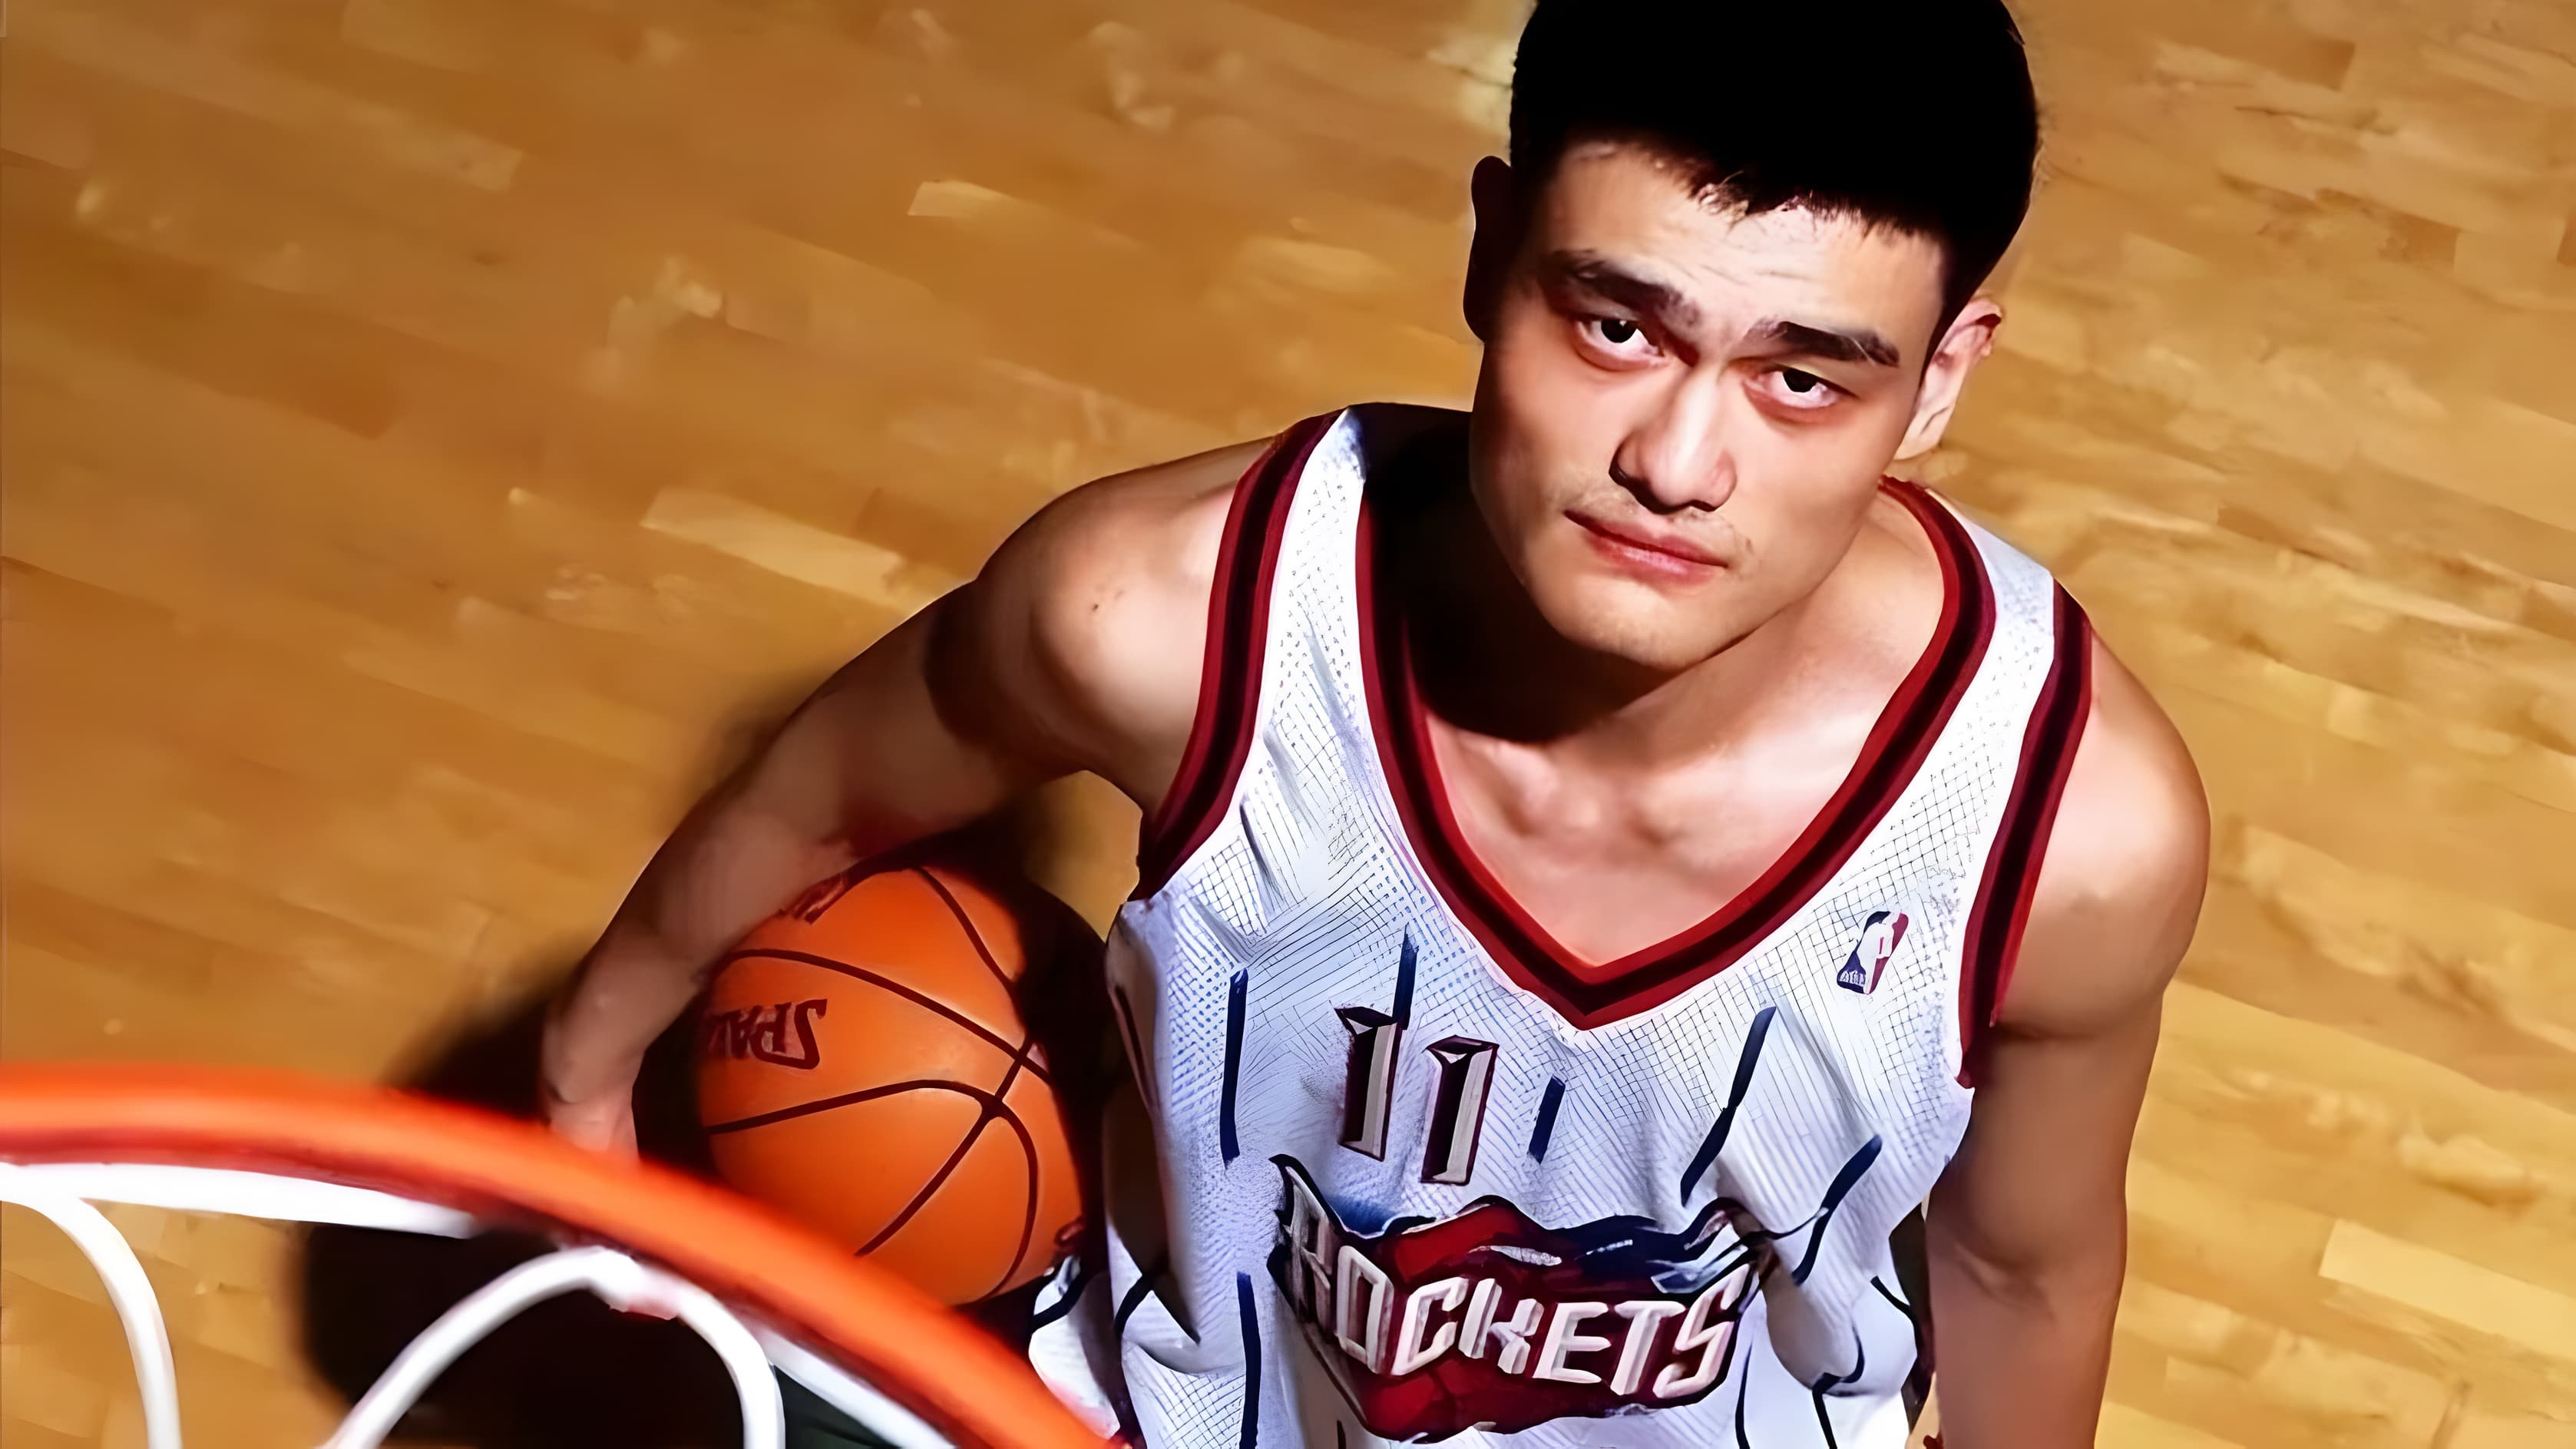 The Year of the Yao (2004)